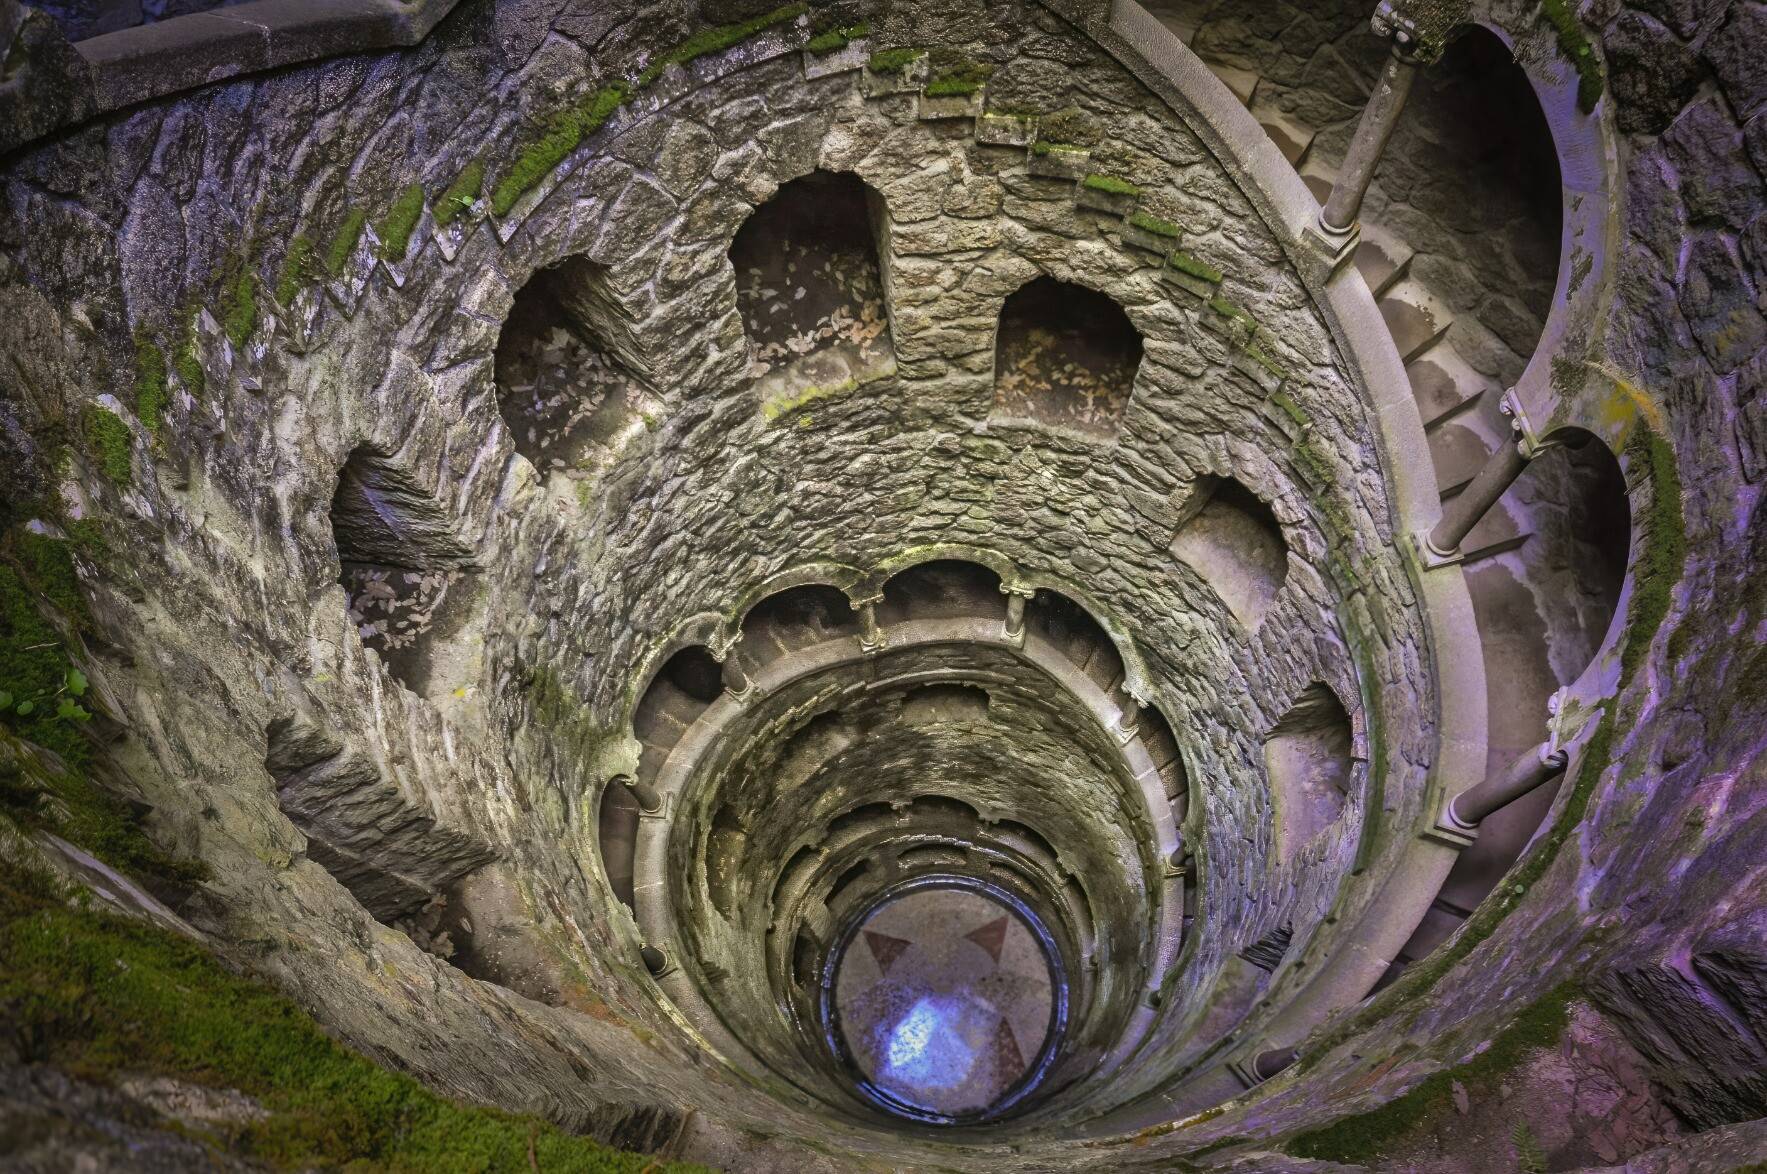 Deep spiral staircase into the Initiation Well. Built of stone, covered in green moss lead down many floors to tile floor at the bottom of the well.